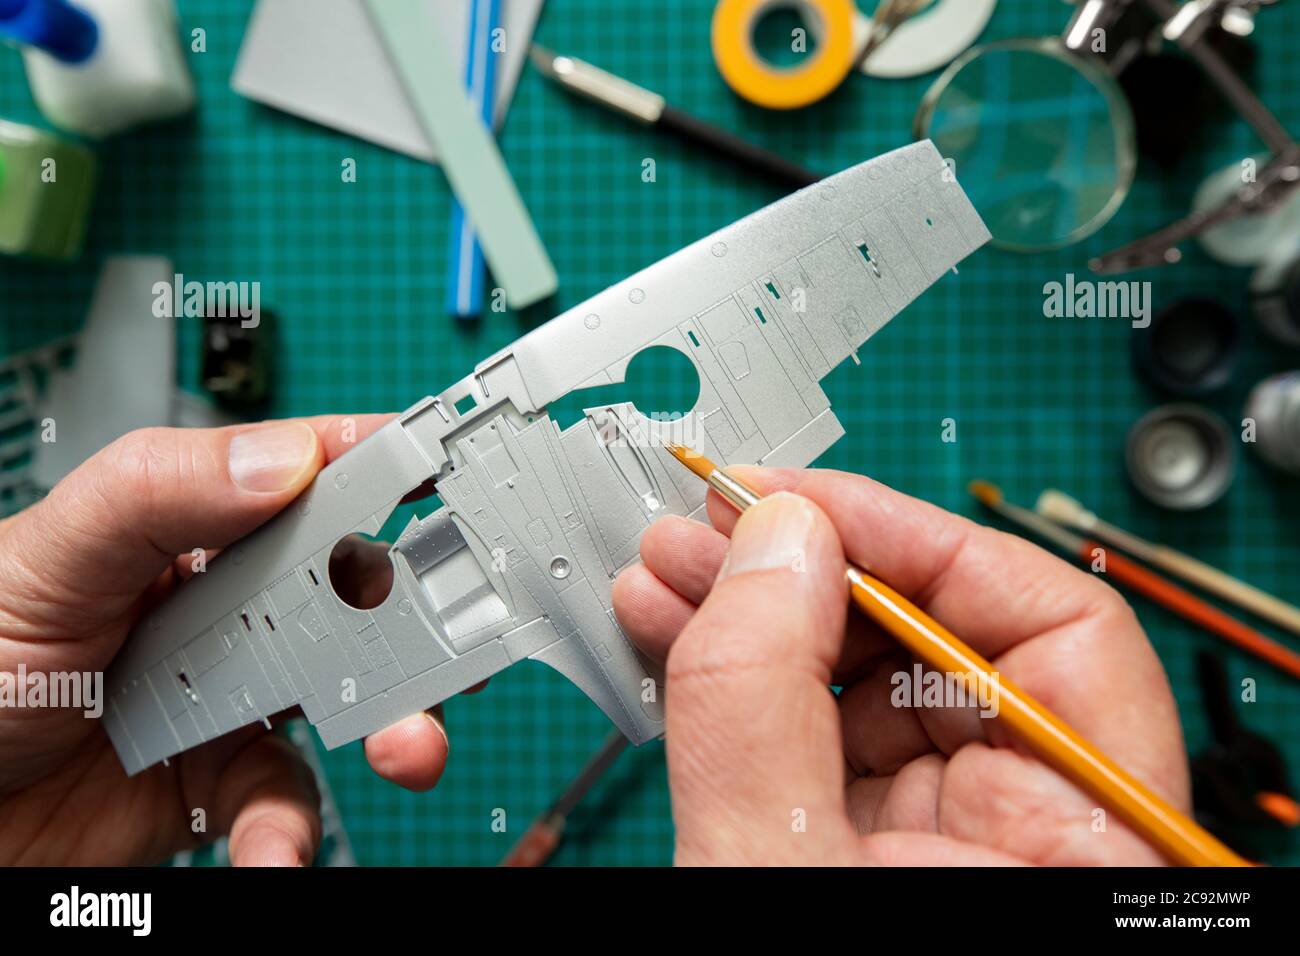 Overhead View Of Man Building Scale Model Aeroplane From Kit On Cutting BoardWith Tools And Materials Stock Photo